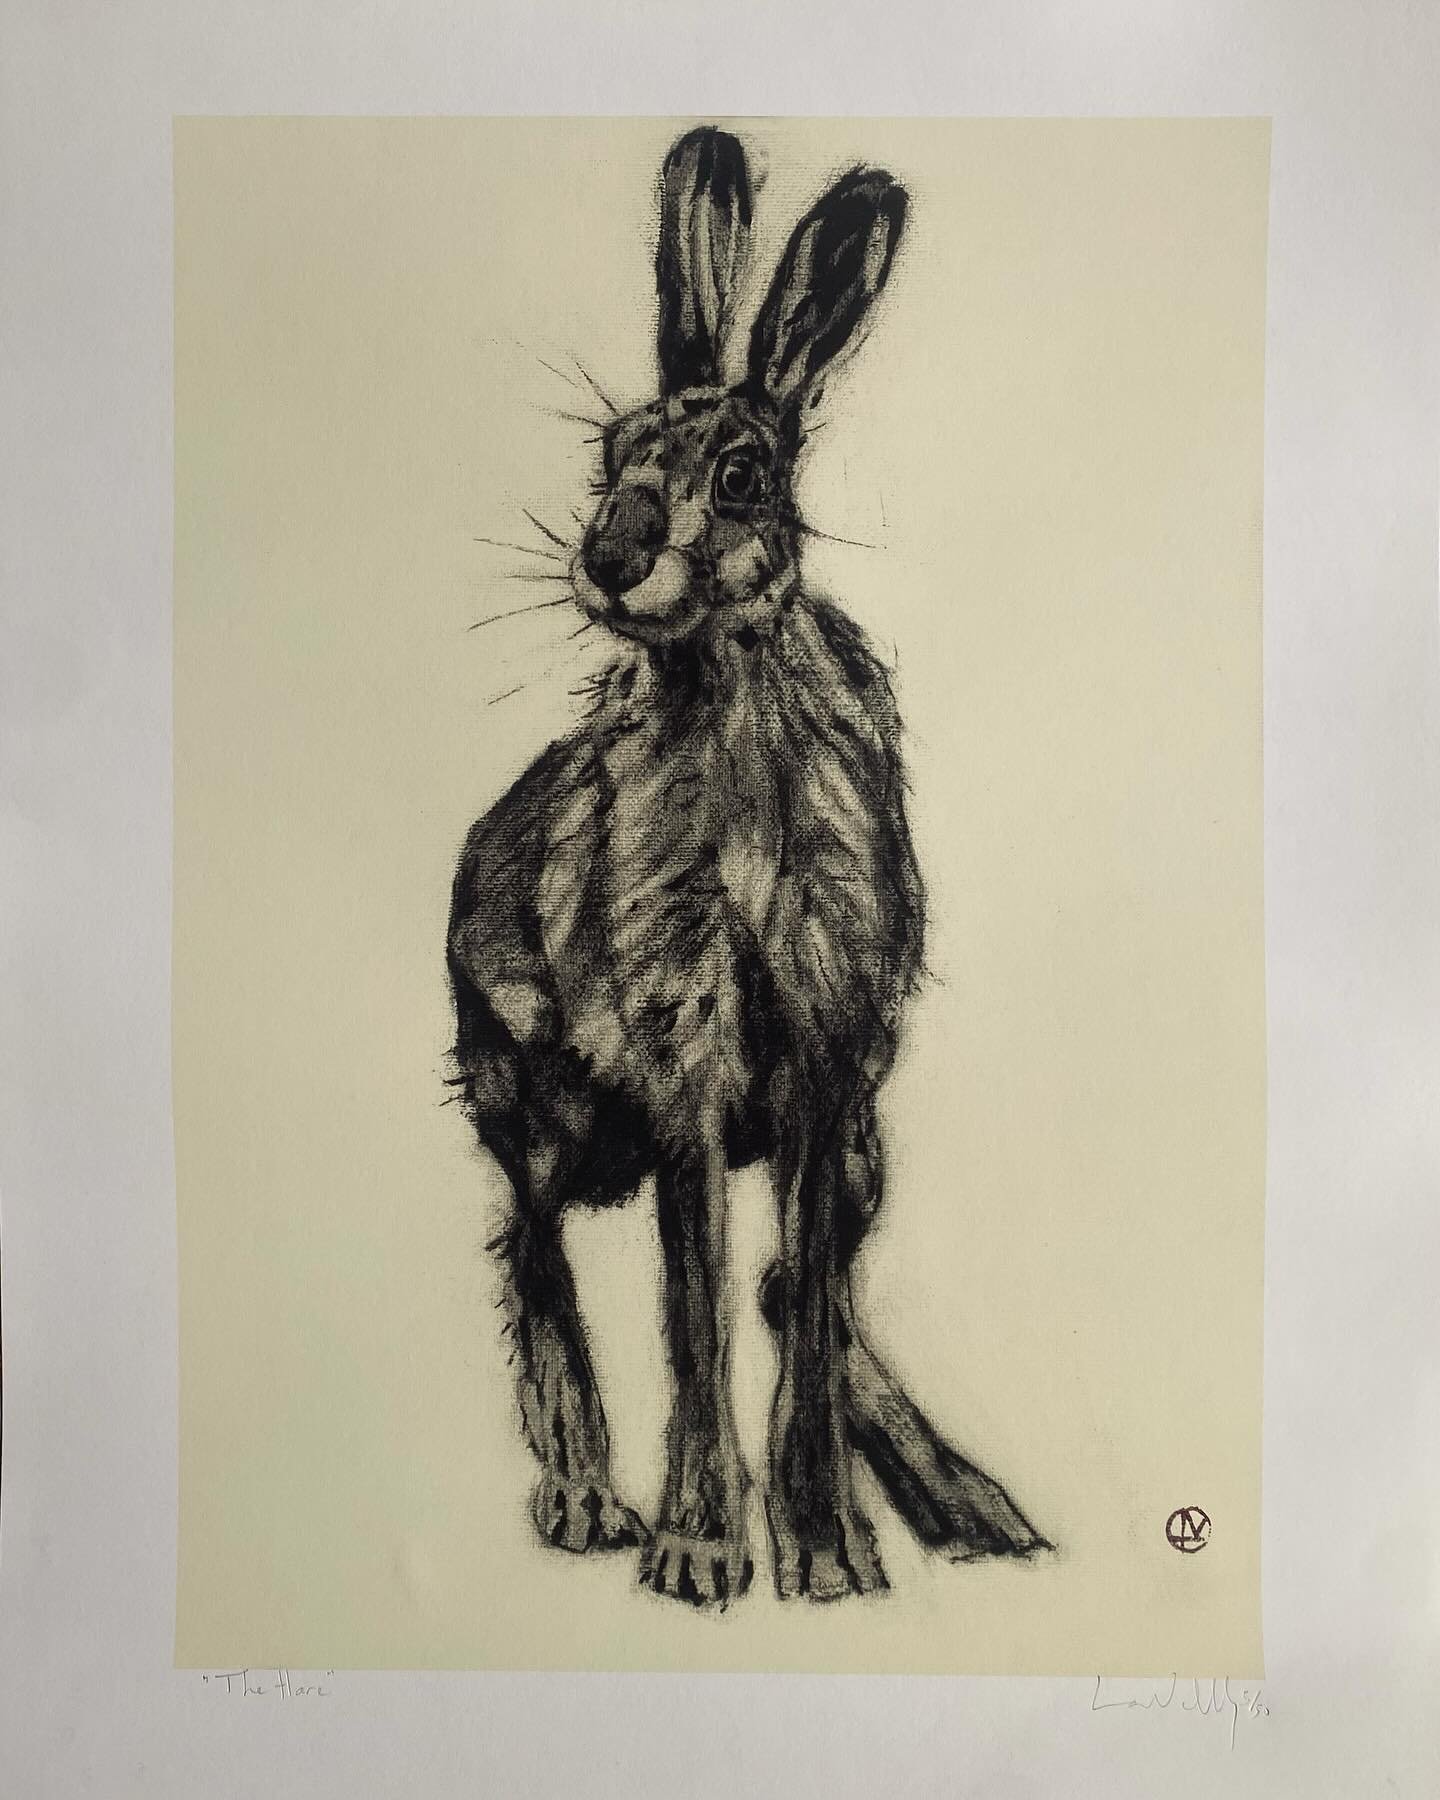 Print of &lsquo;The Hare&rsquo; off to a new home. These prints are all signed and numbered. #hare #fineartprints #artprint #limitededition